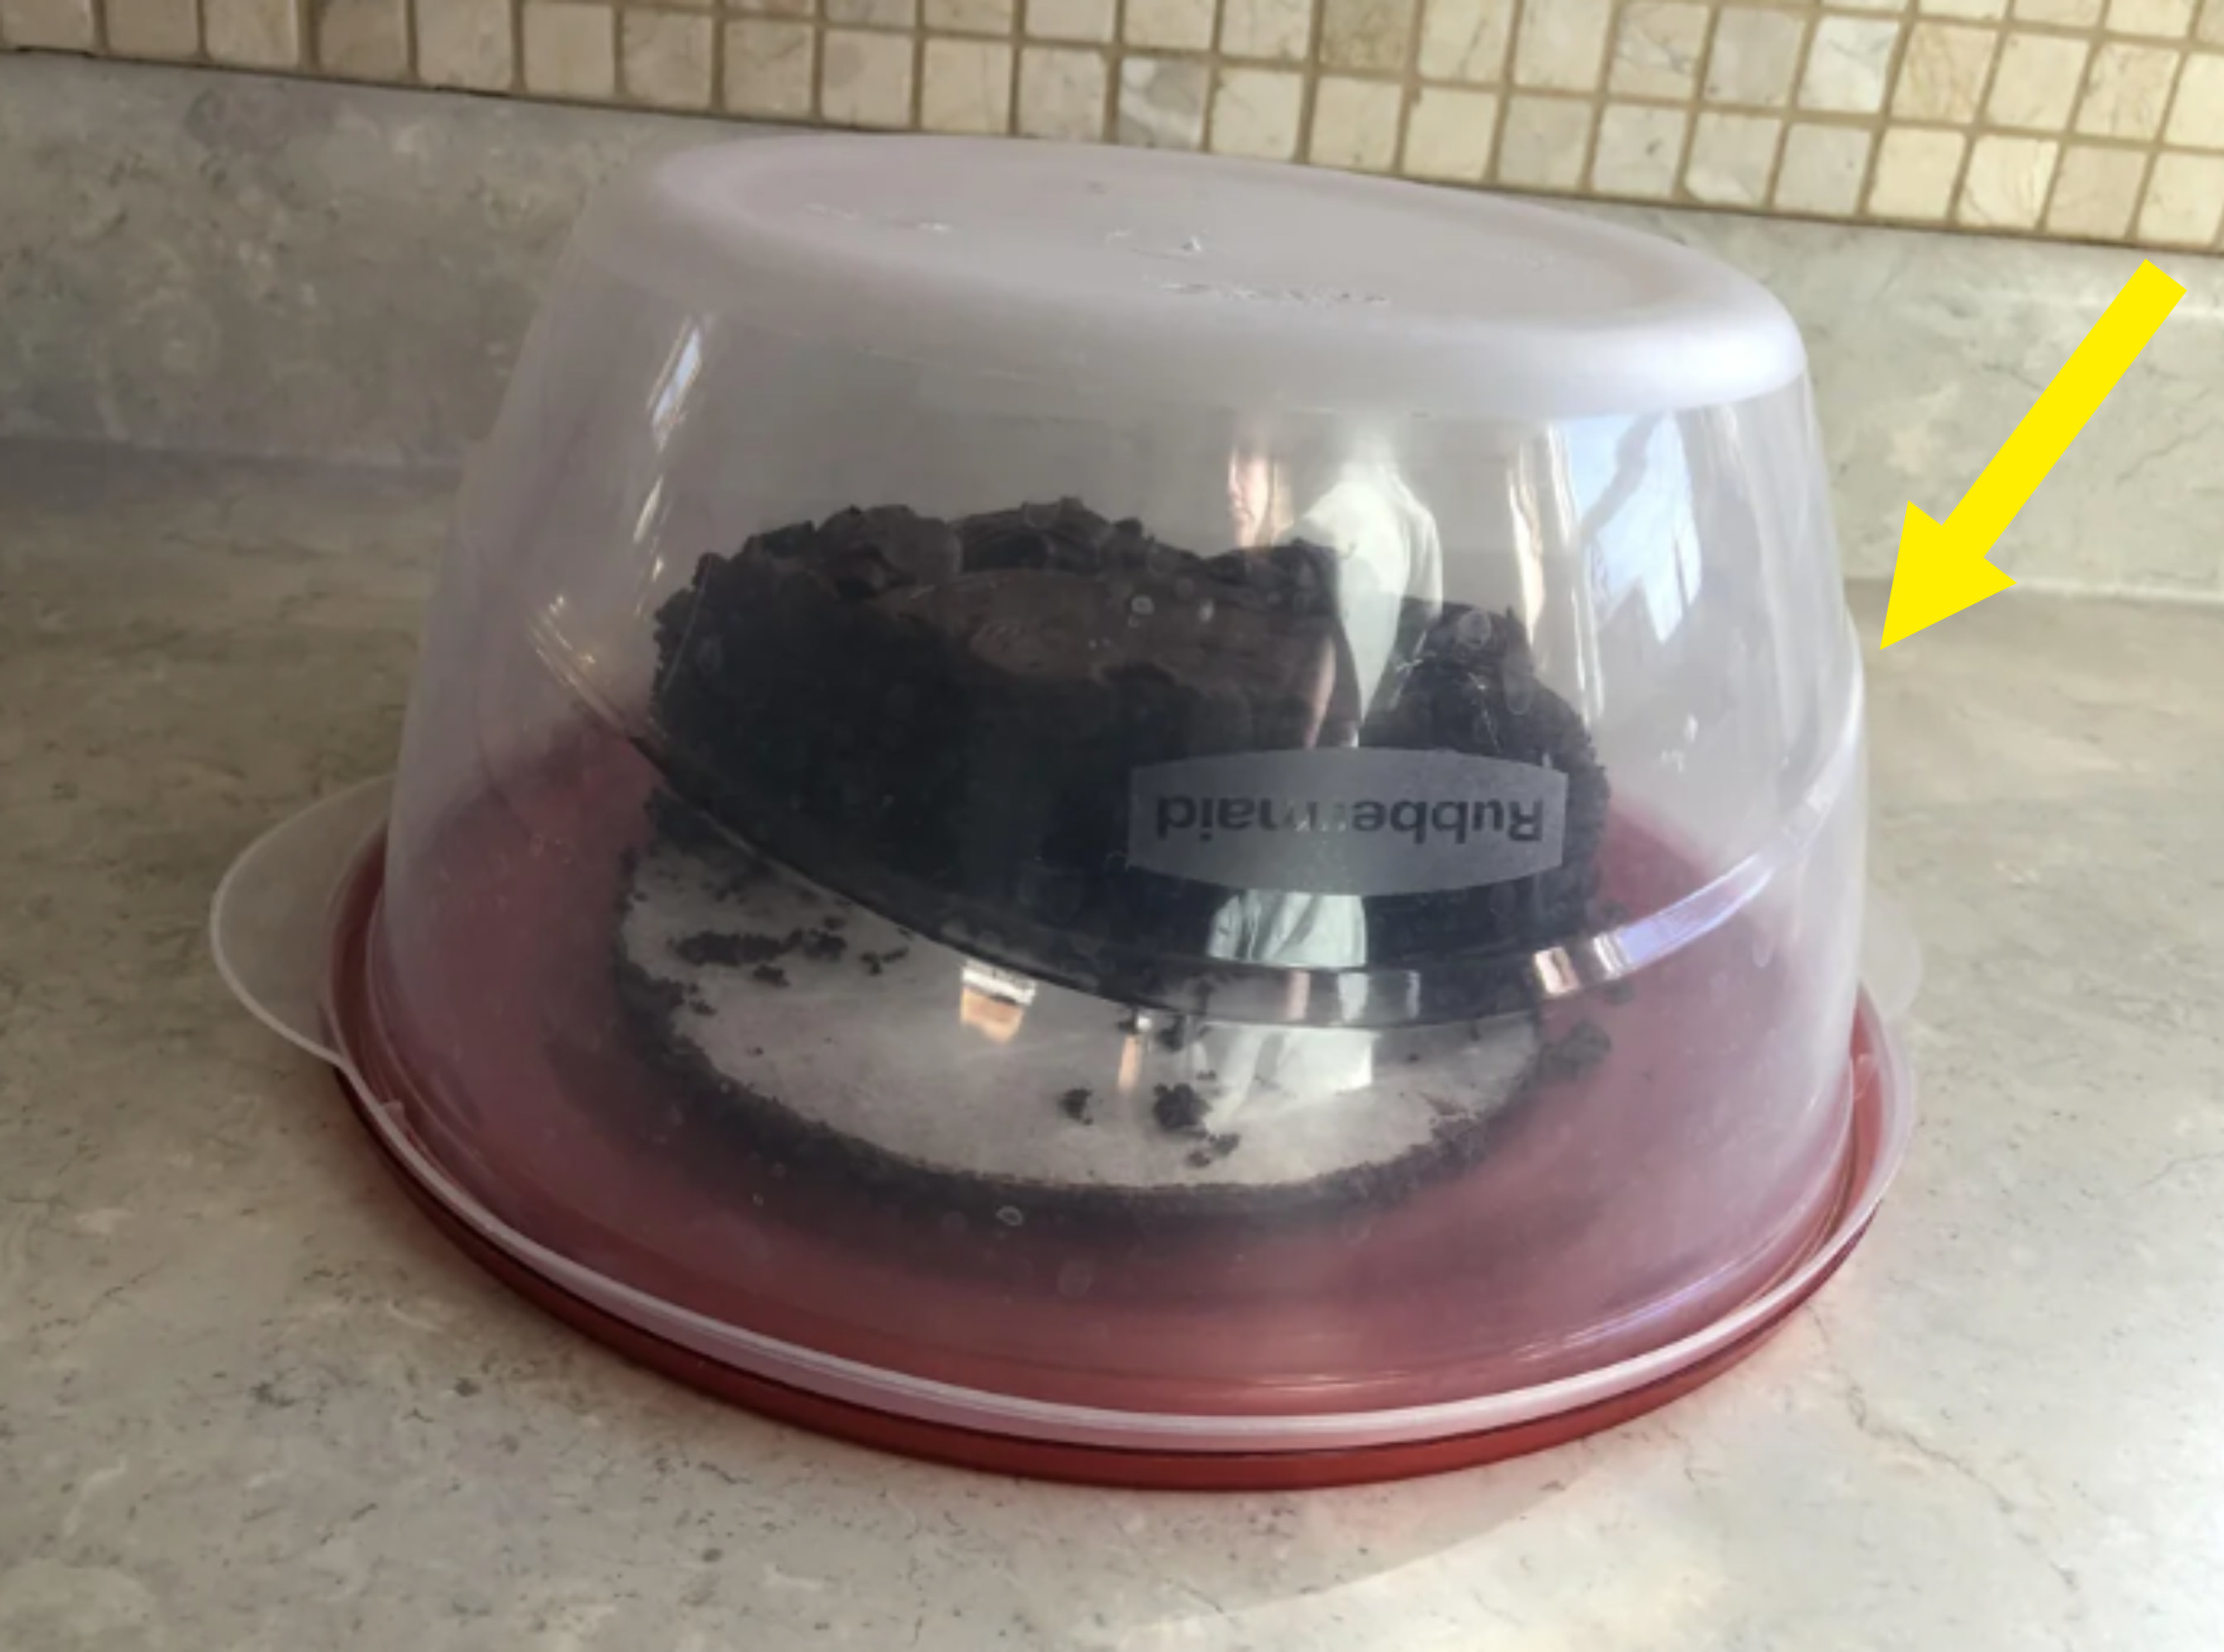 A Tupperware used as a cake dome